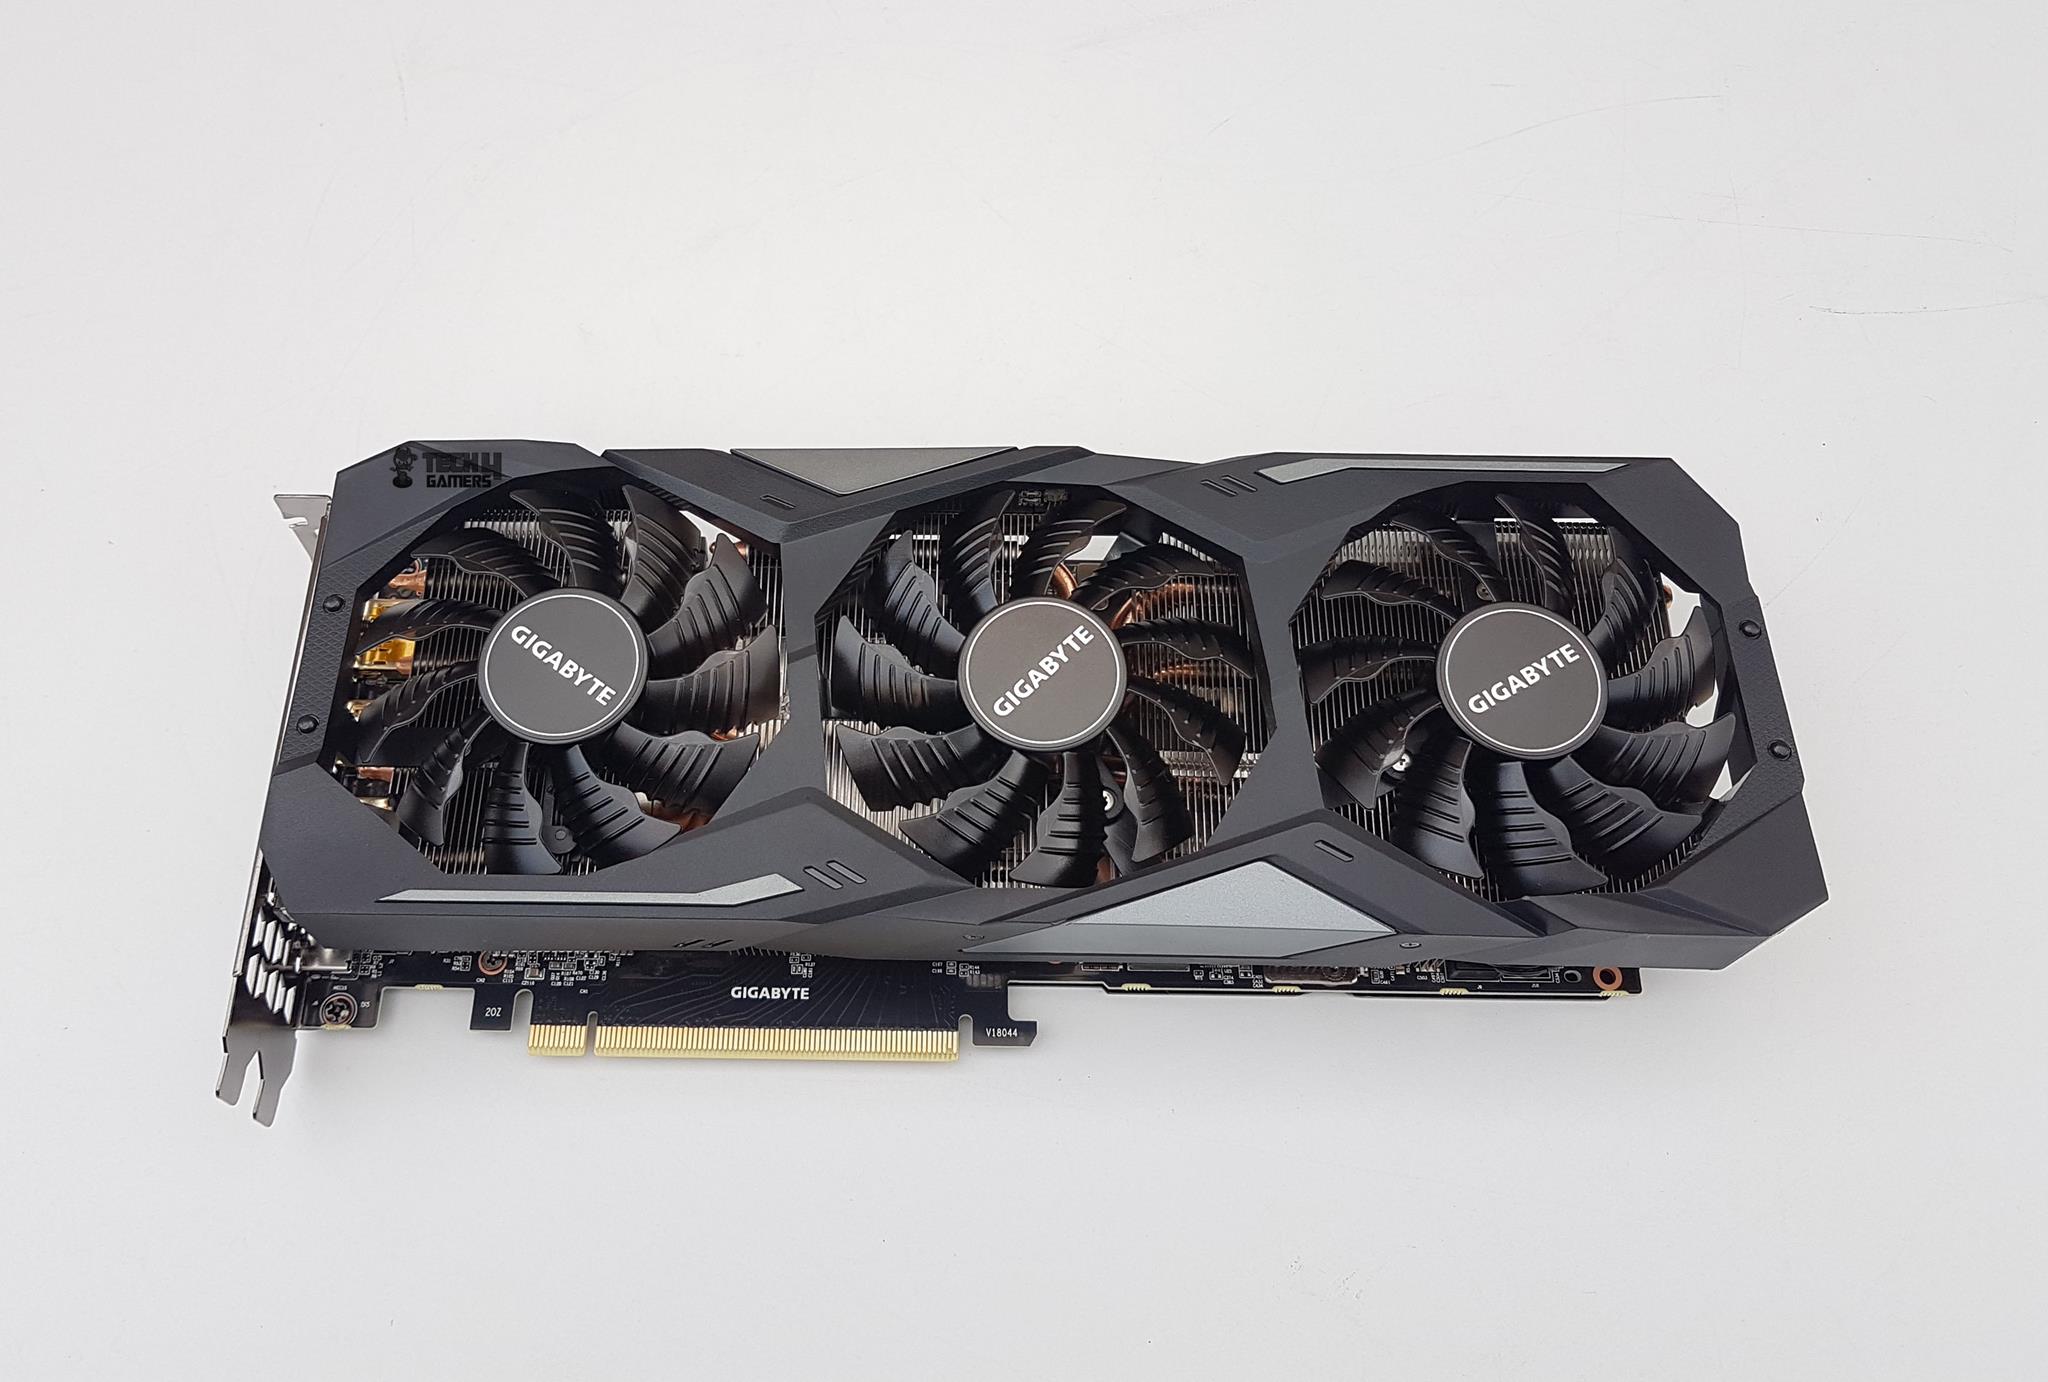 GeForce® RTX 2070 SUPER™ GAMING OC 8G Key Features